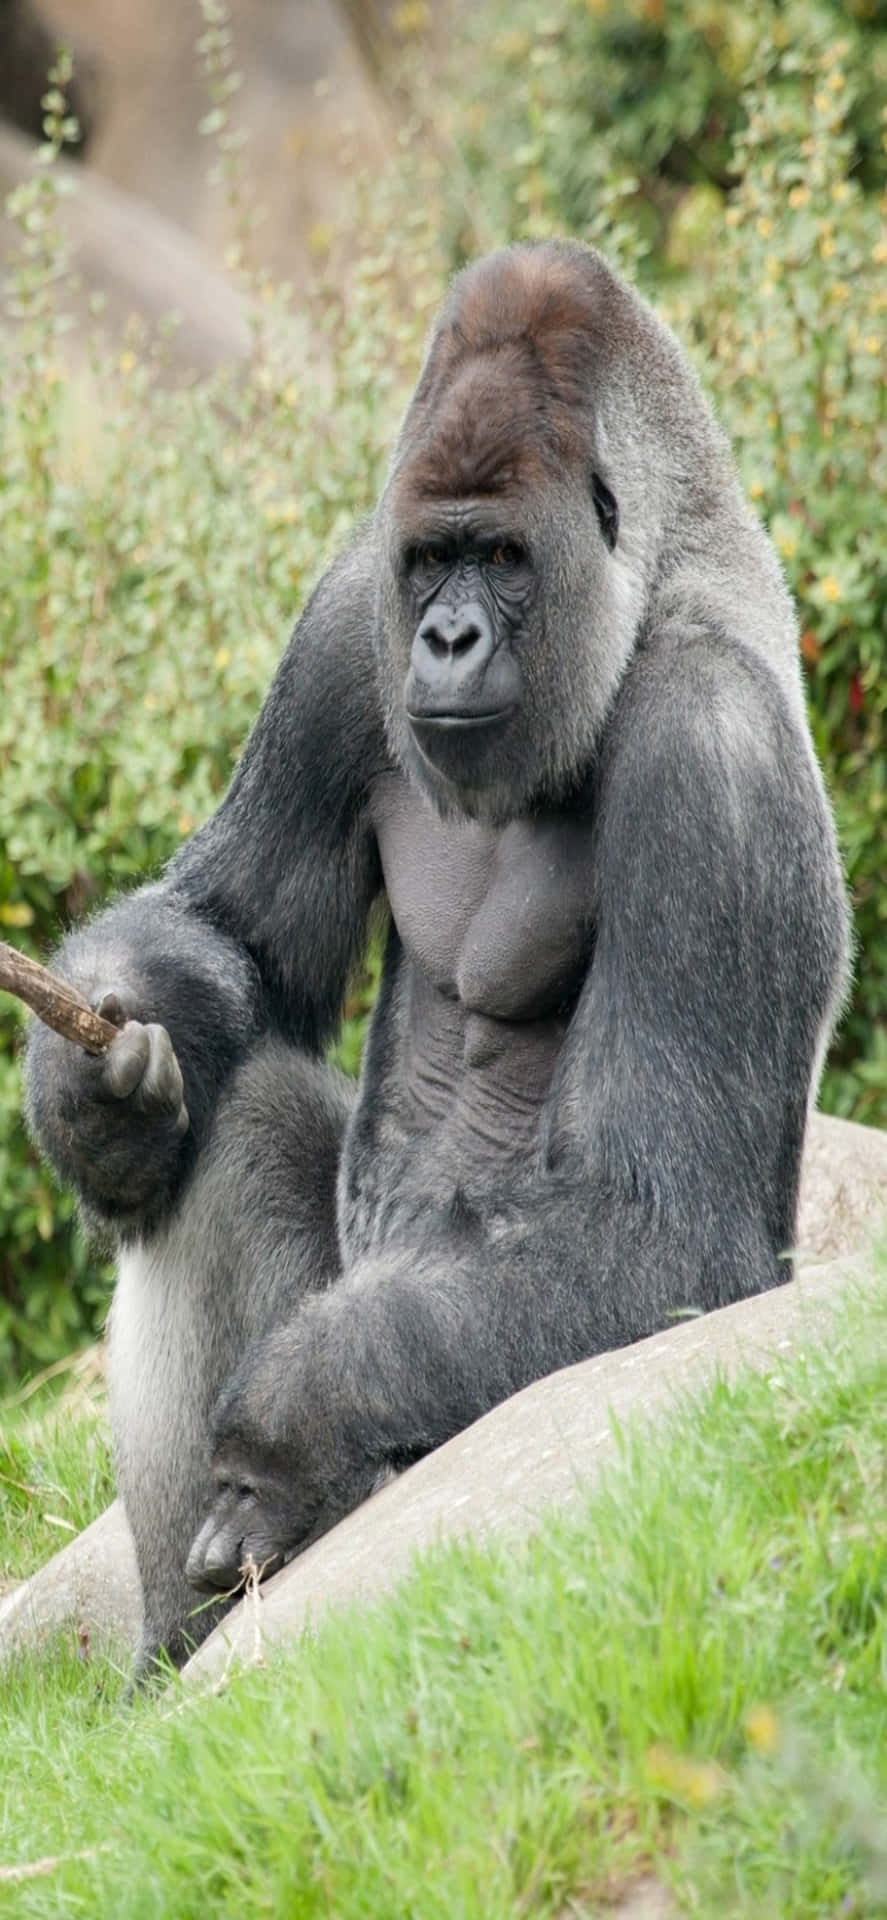 The Strength of the Iphone X - Perfectly Represented By This Majestic Gorilla